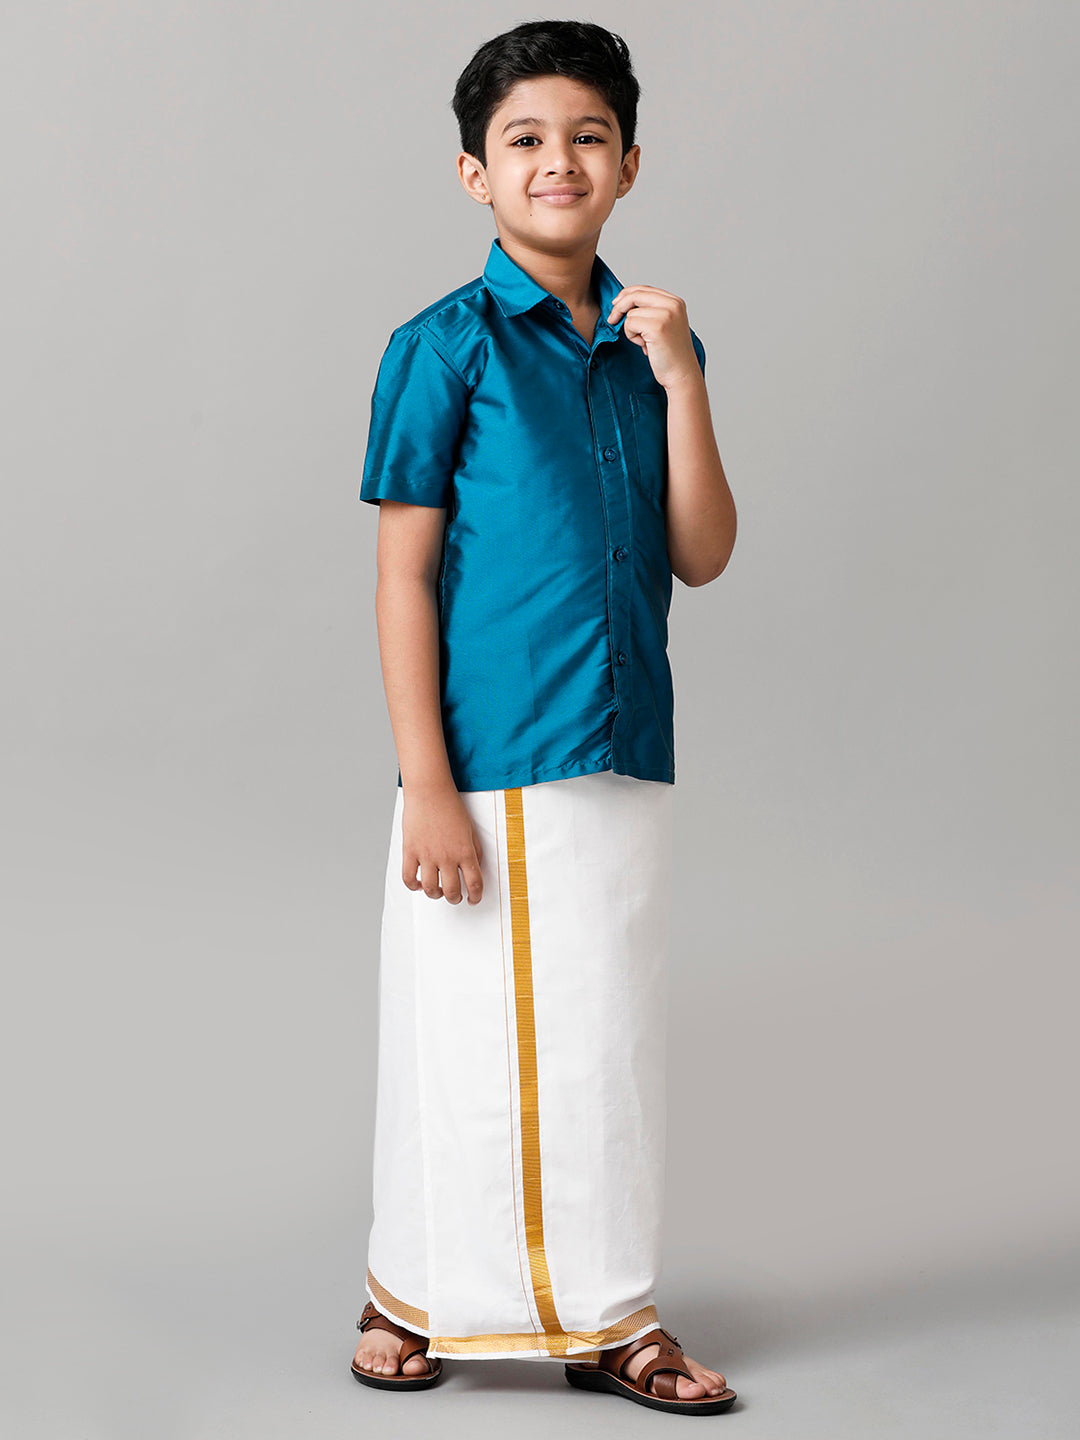 Boys Silk Cotton Light Blue Half Sleeves Shirt with Adjustable White Dhoti Combo K1-Side view